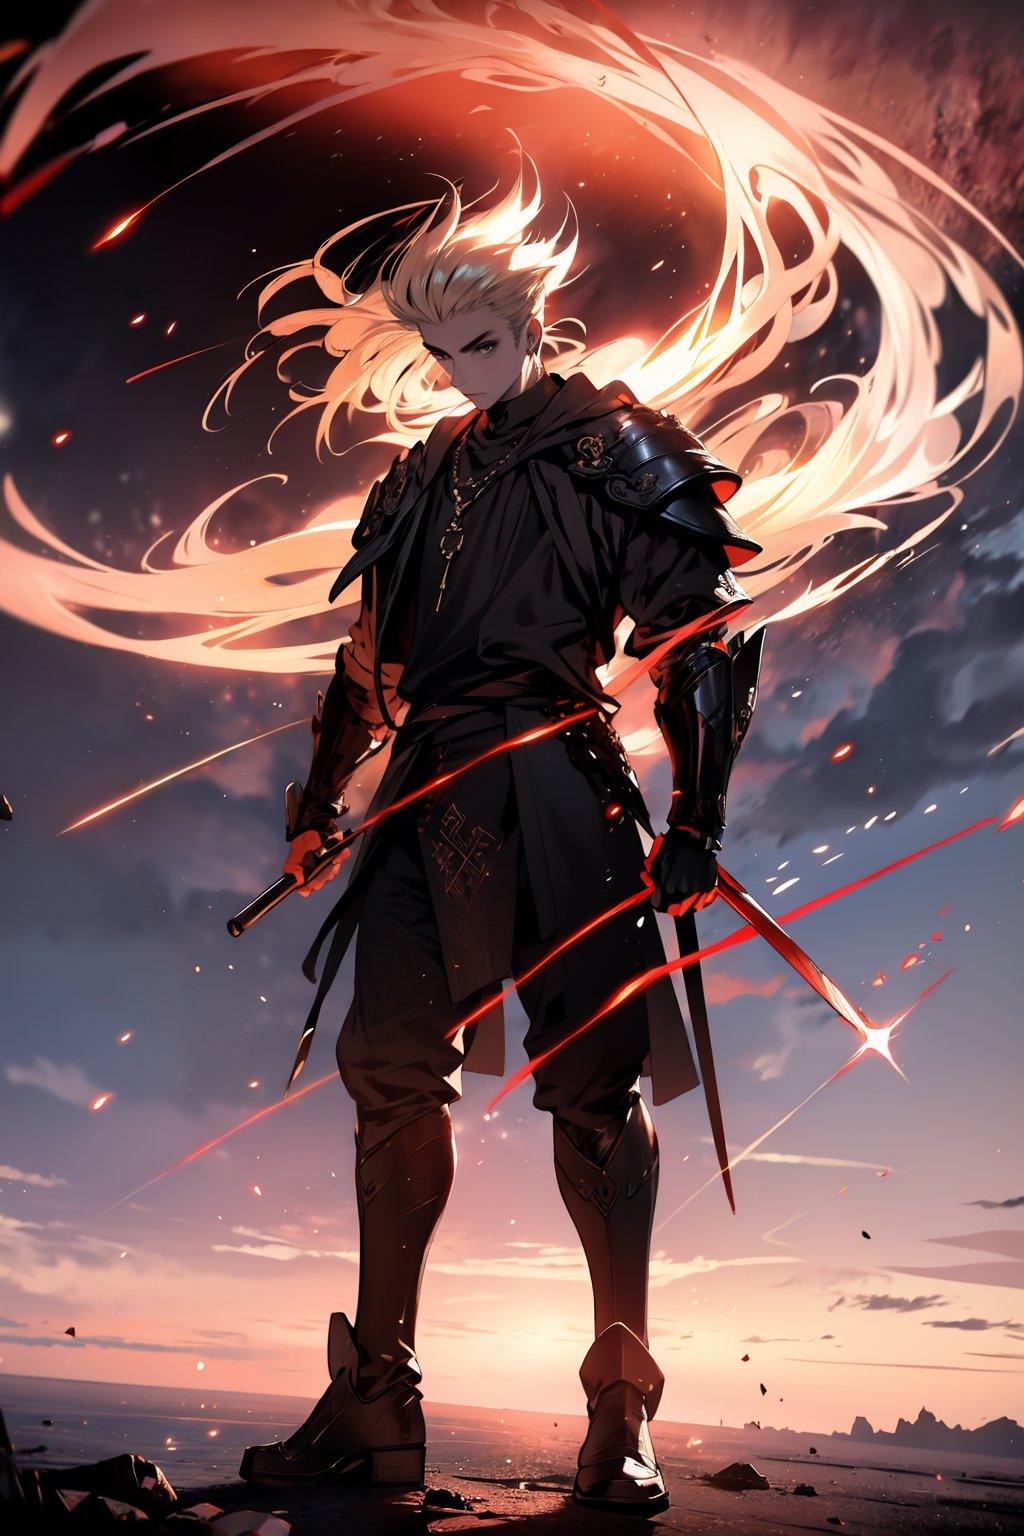 absurdres, highres, ultra detailed, (1boy:1.3), BREAK, infrared photography, otherworldly hues, surreal landscapes, unseen light, ethereal glow, vibrant colors, ghostly effect, 1 Viking Warrior, light Blond hair, ((braded hair)), Viking axe, leather armor, brown and black clothing